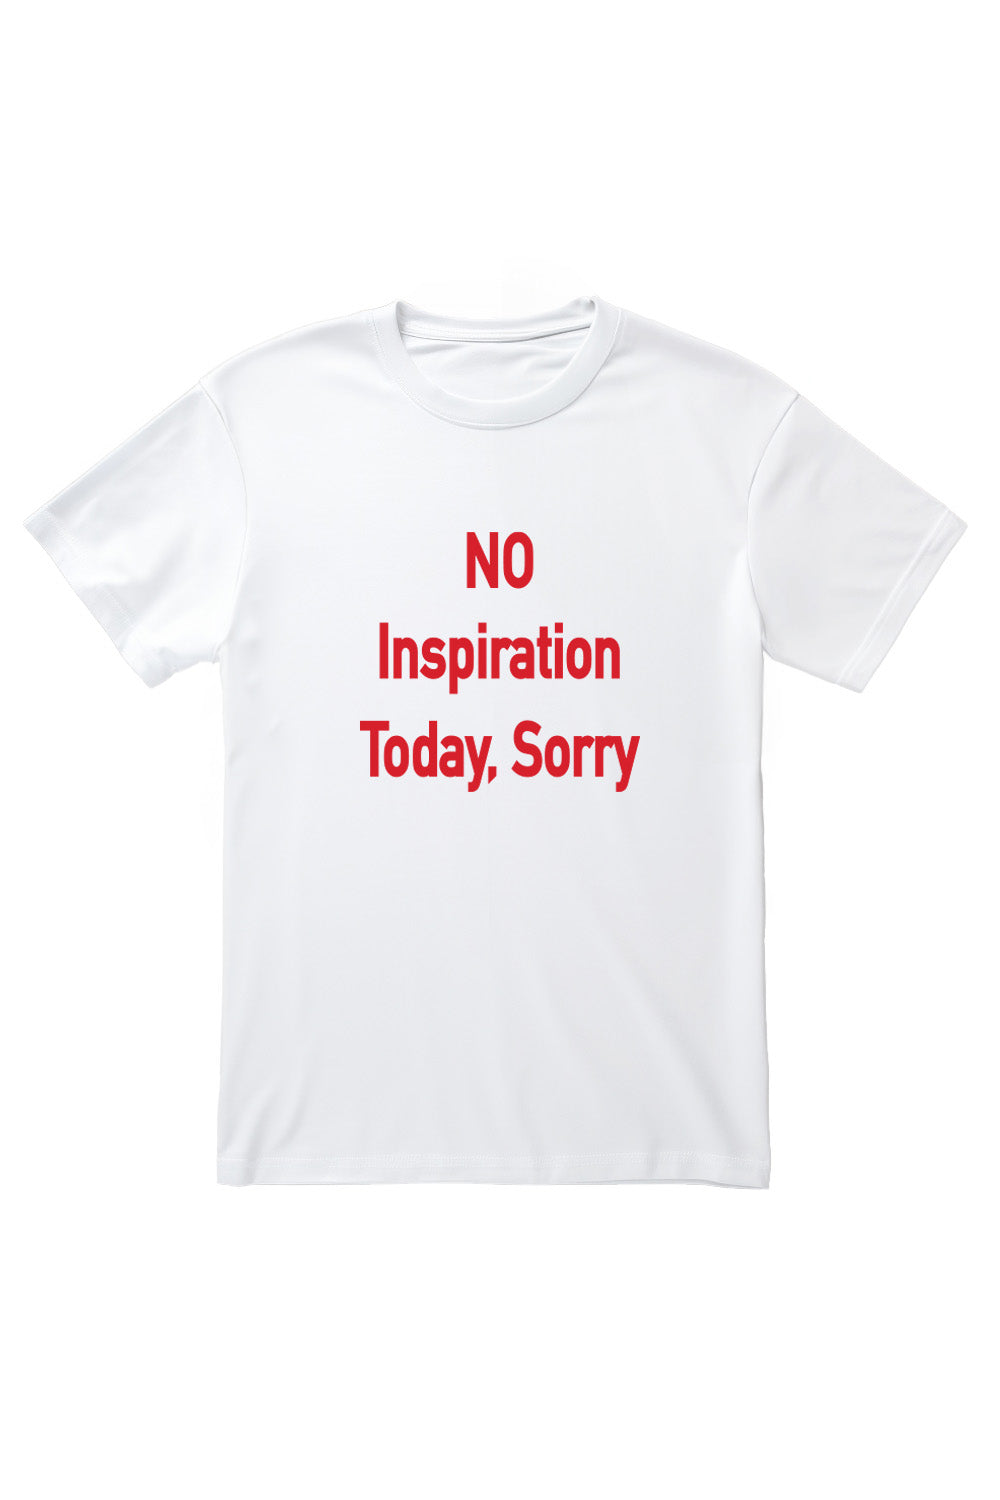 No Inspiration Today, Sorry Printed T-Shirt